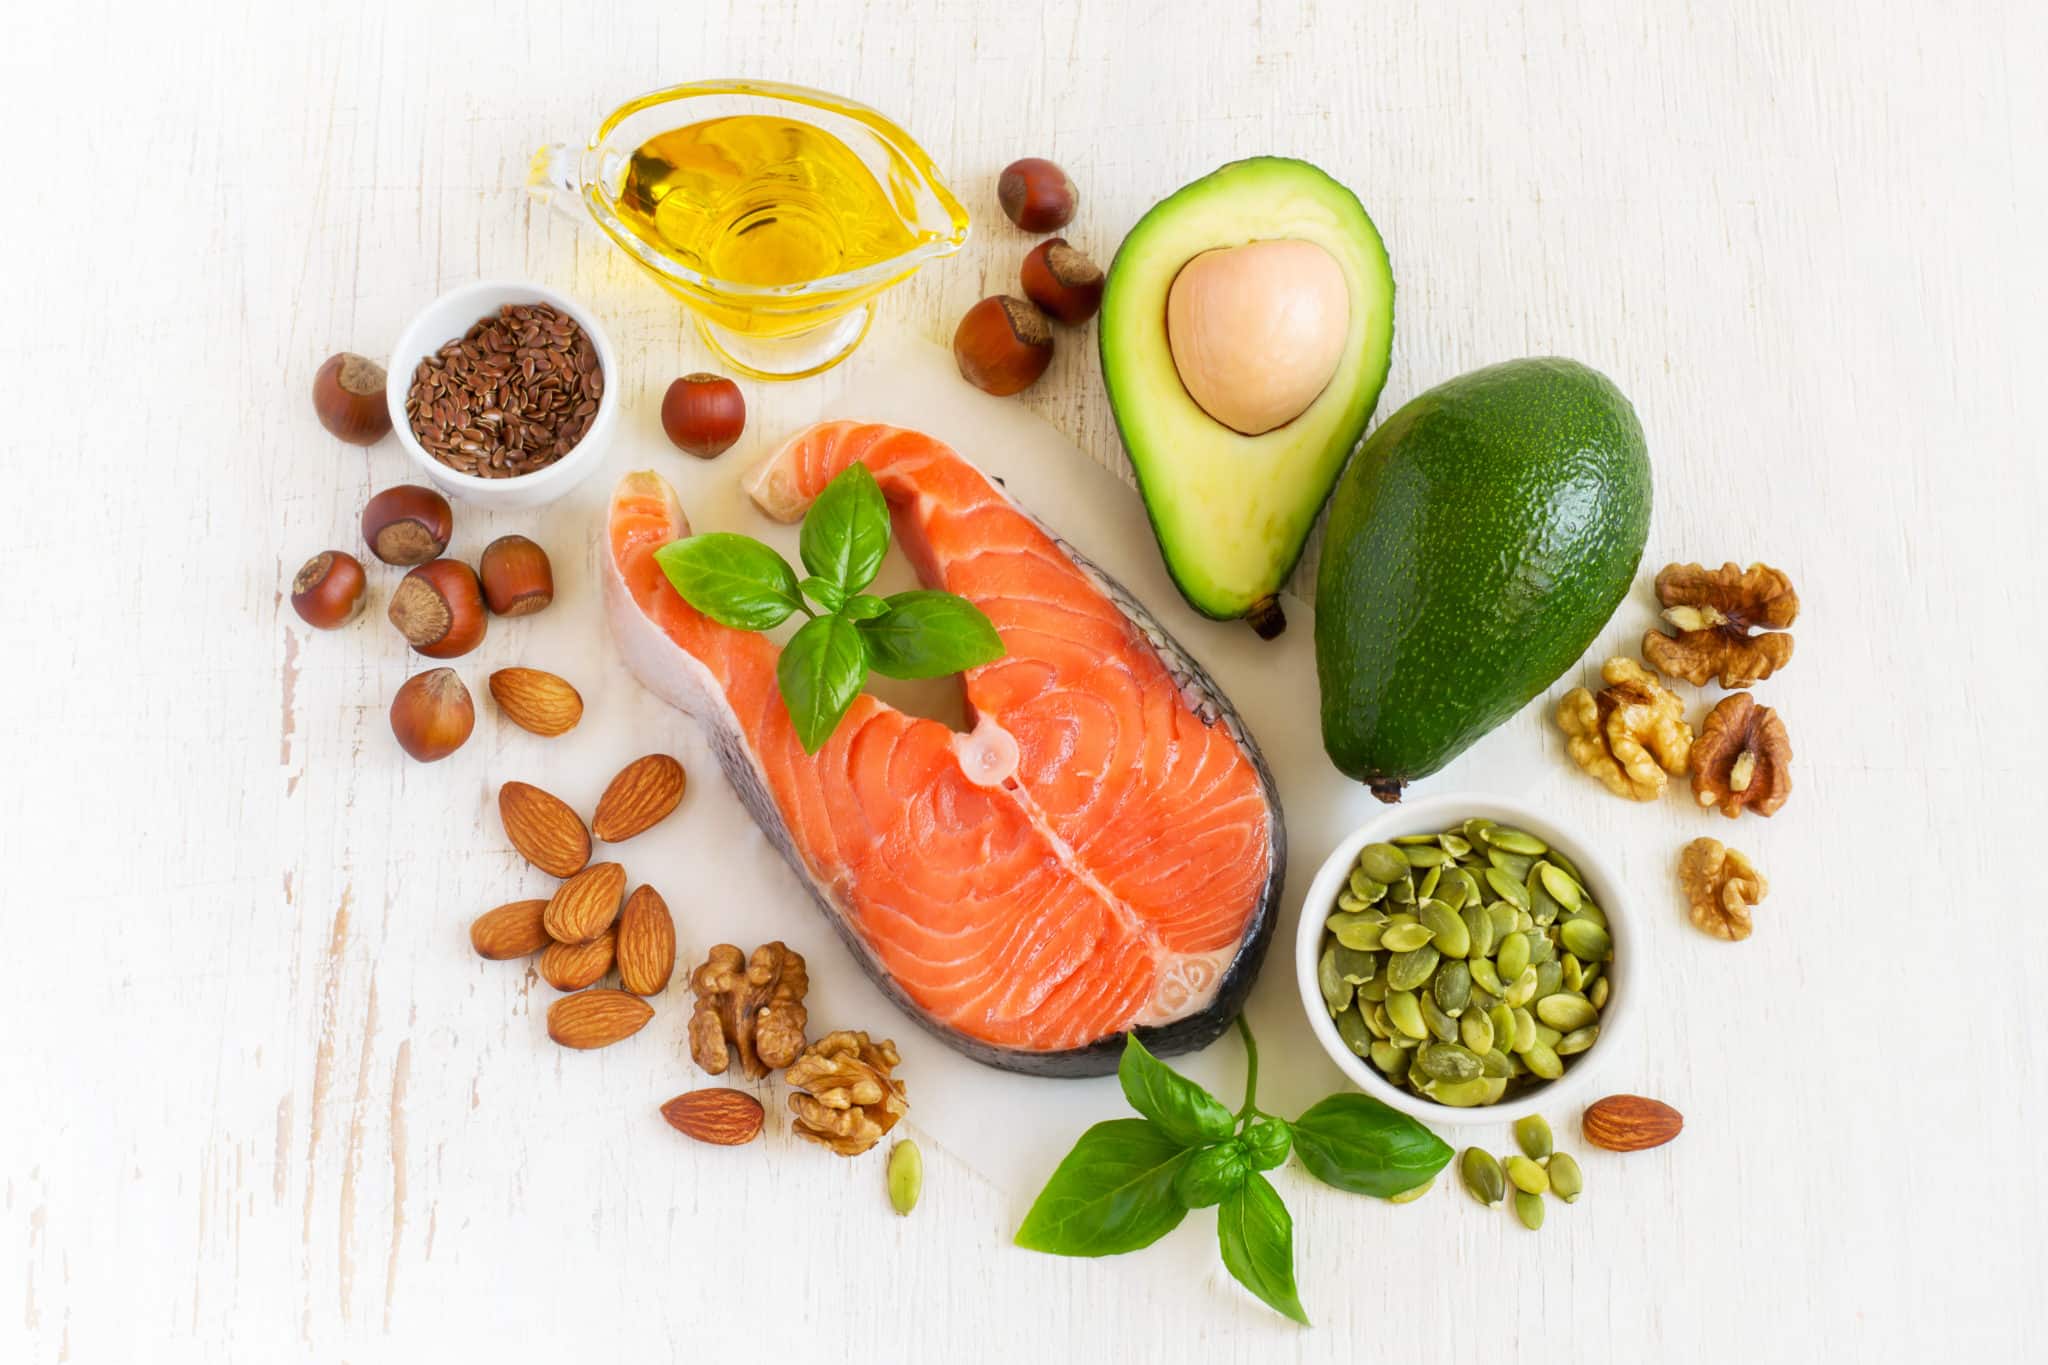 Table of healthy fats like salmon, avocado, nuts and seeds